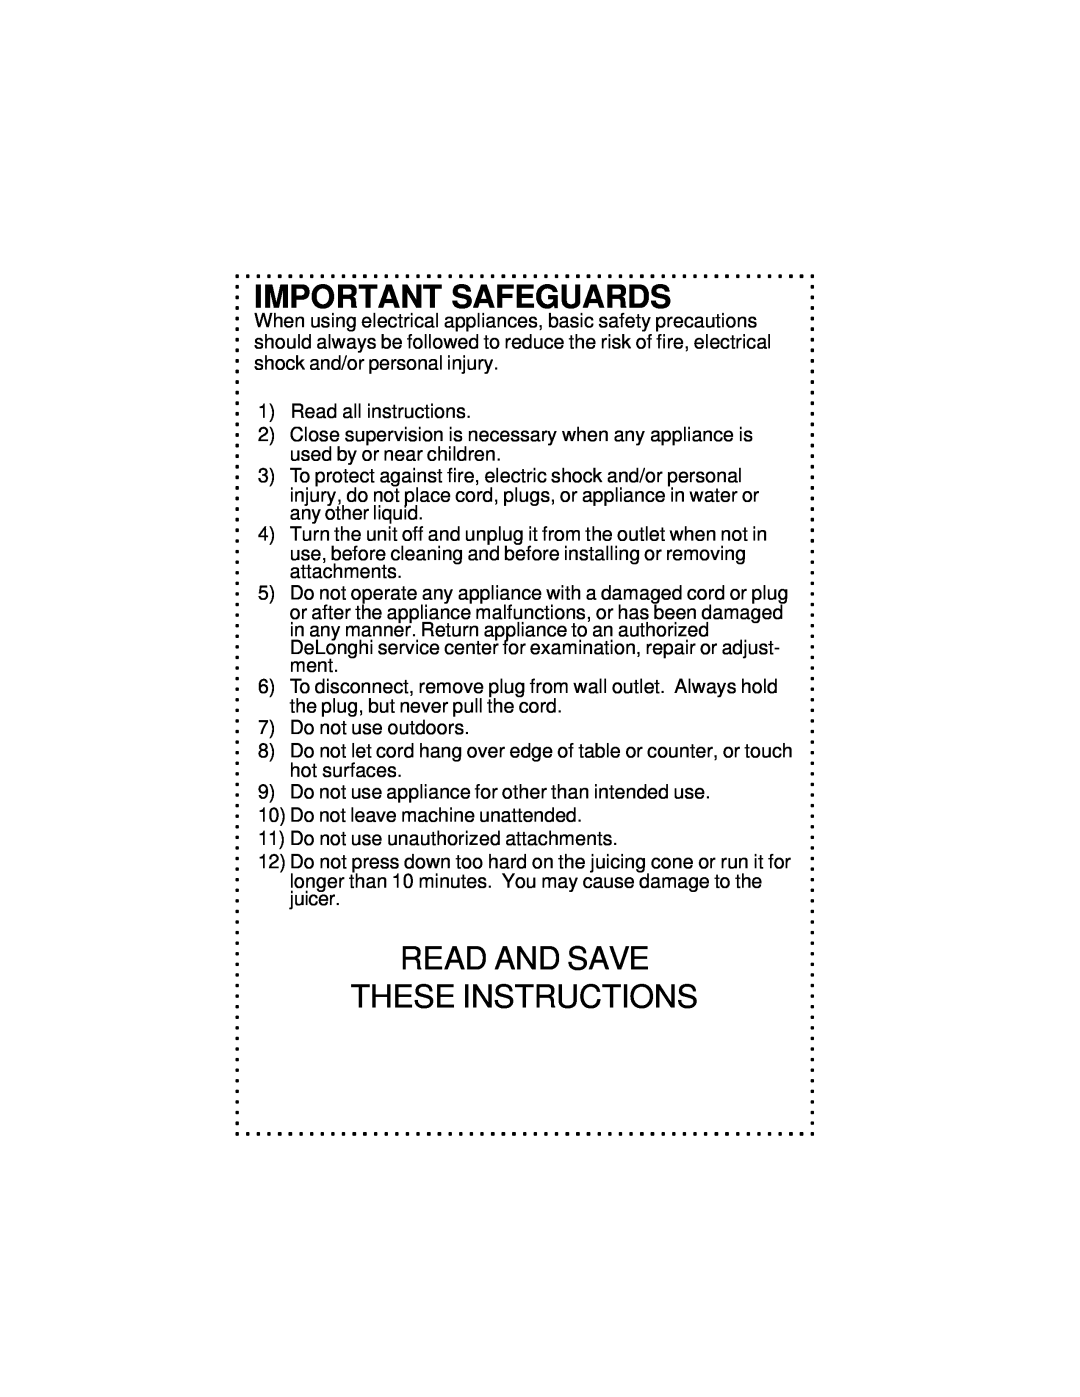 DeLonghi DJE270 instruction manual Important Safeguards, Read And Save These Instructions 